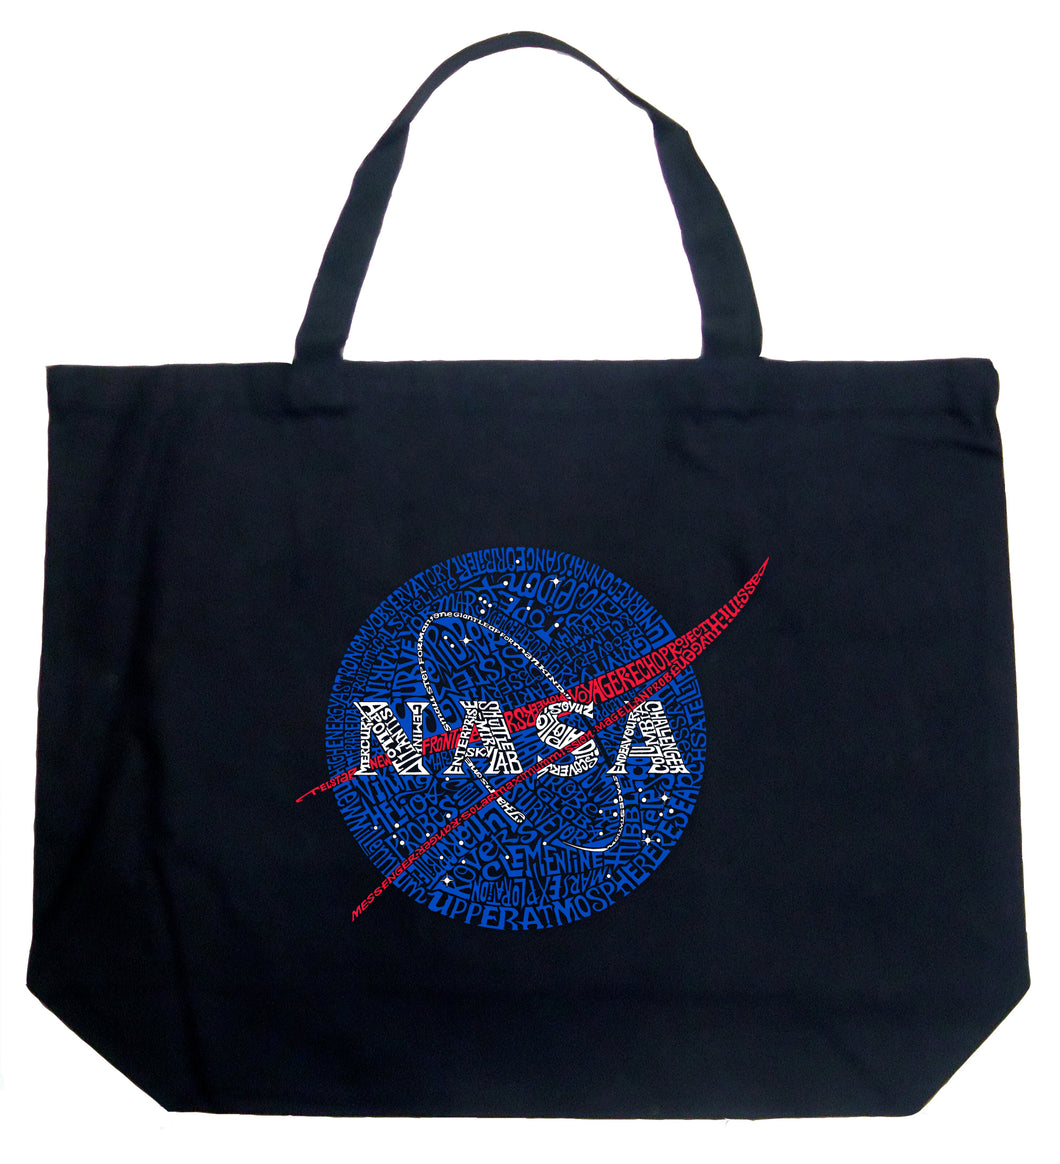 NASA's Most Notable Missions - Large Word Art Tote Bag